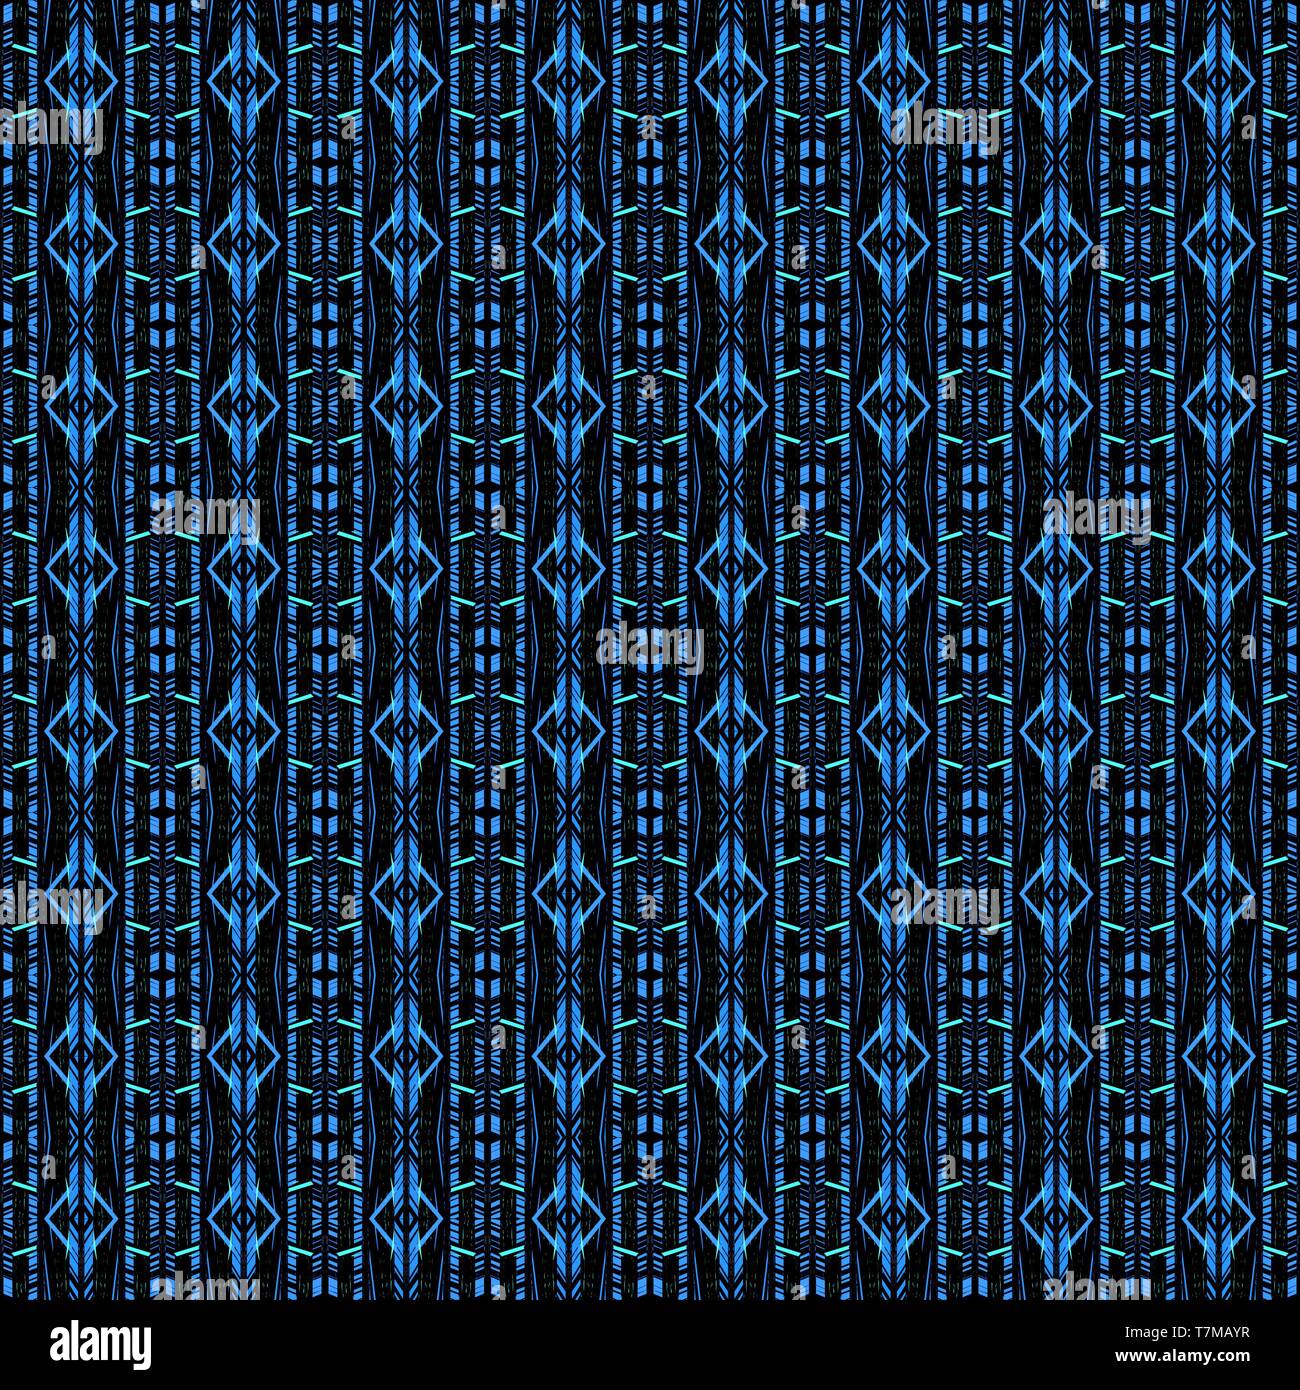 dark seamless pattern with black, dodger blue and strong blue